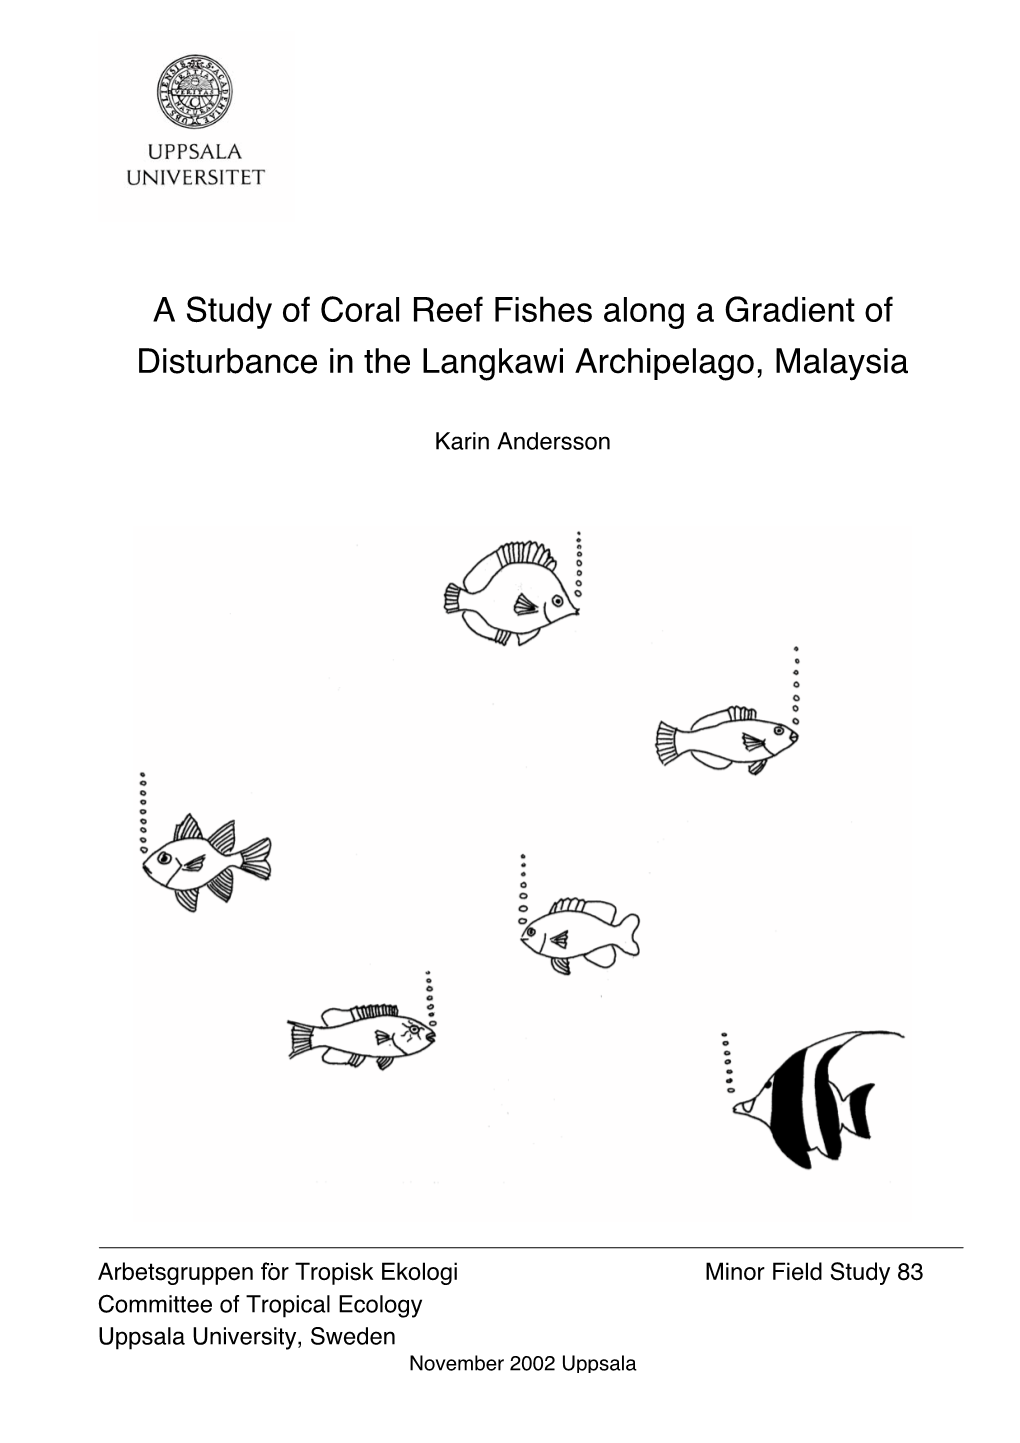 A Study of Coral Reef Fishes Along a Gradient of Disturbance in the Langkawi Archipelago, Malaysia